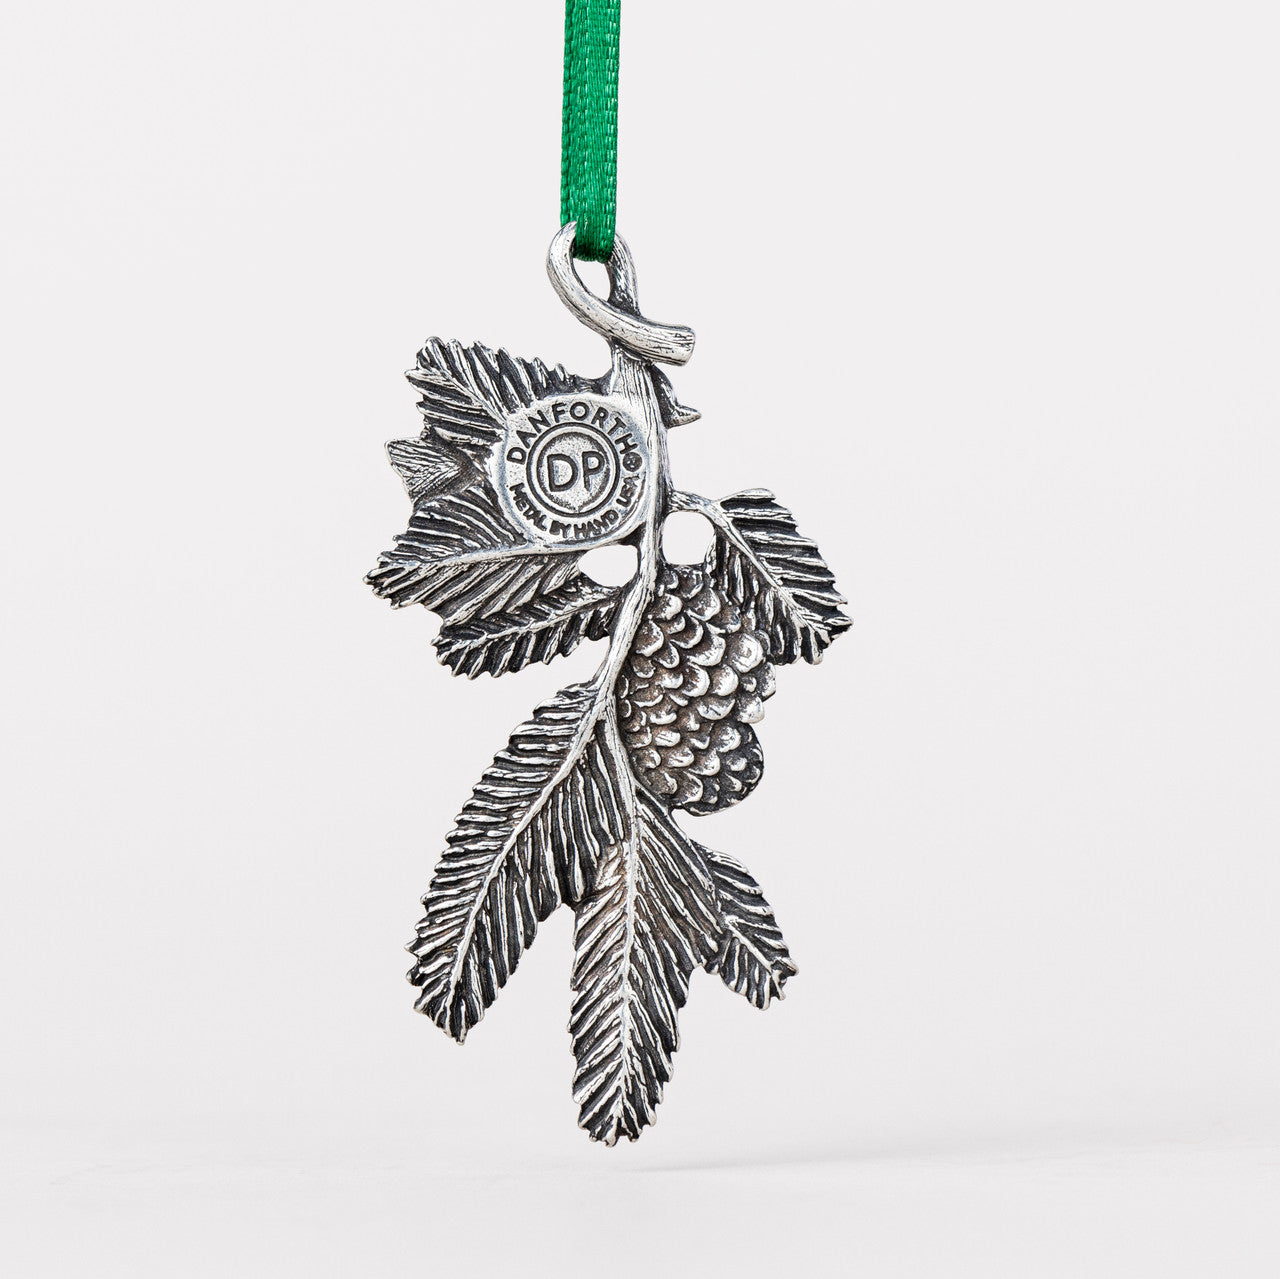 Danforth Pewter Bird on a Bough Carded Ornament. Backside of ornament with Danforth Pewter Touch Mark.